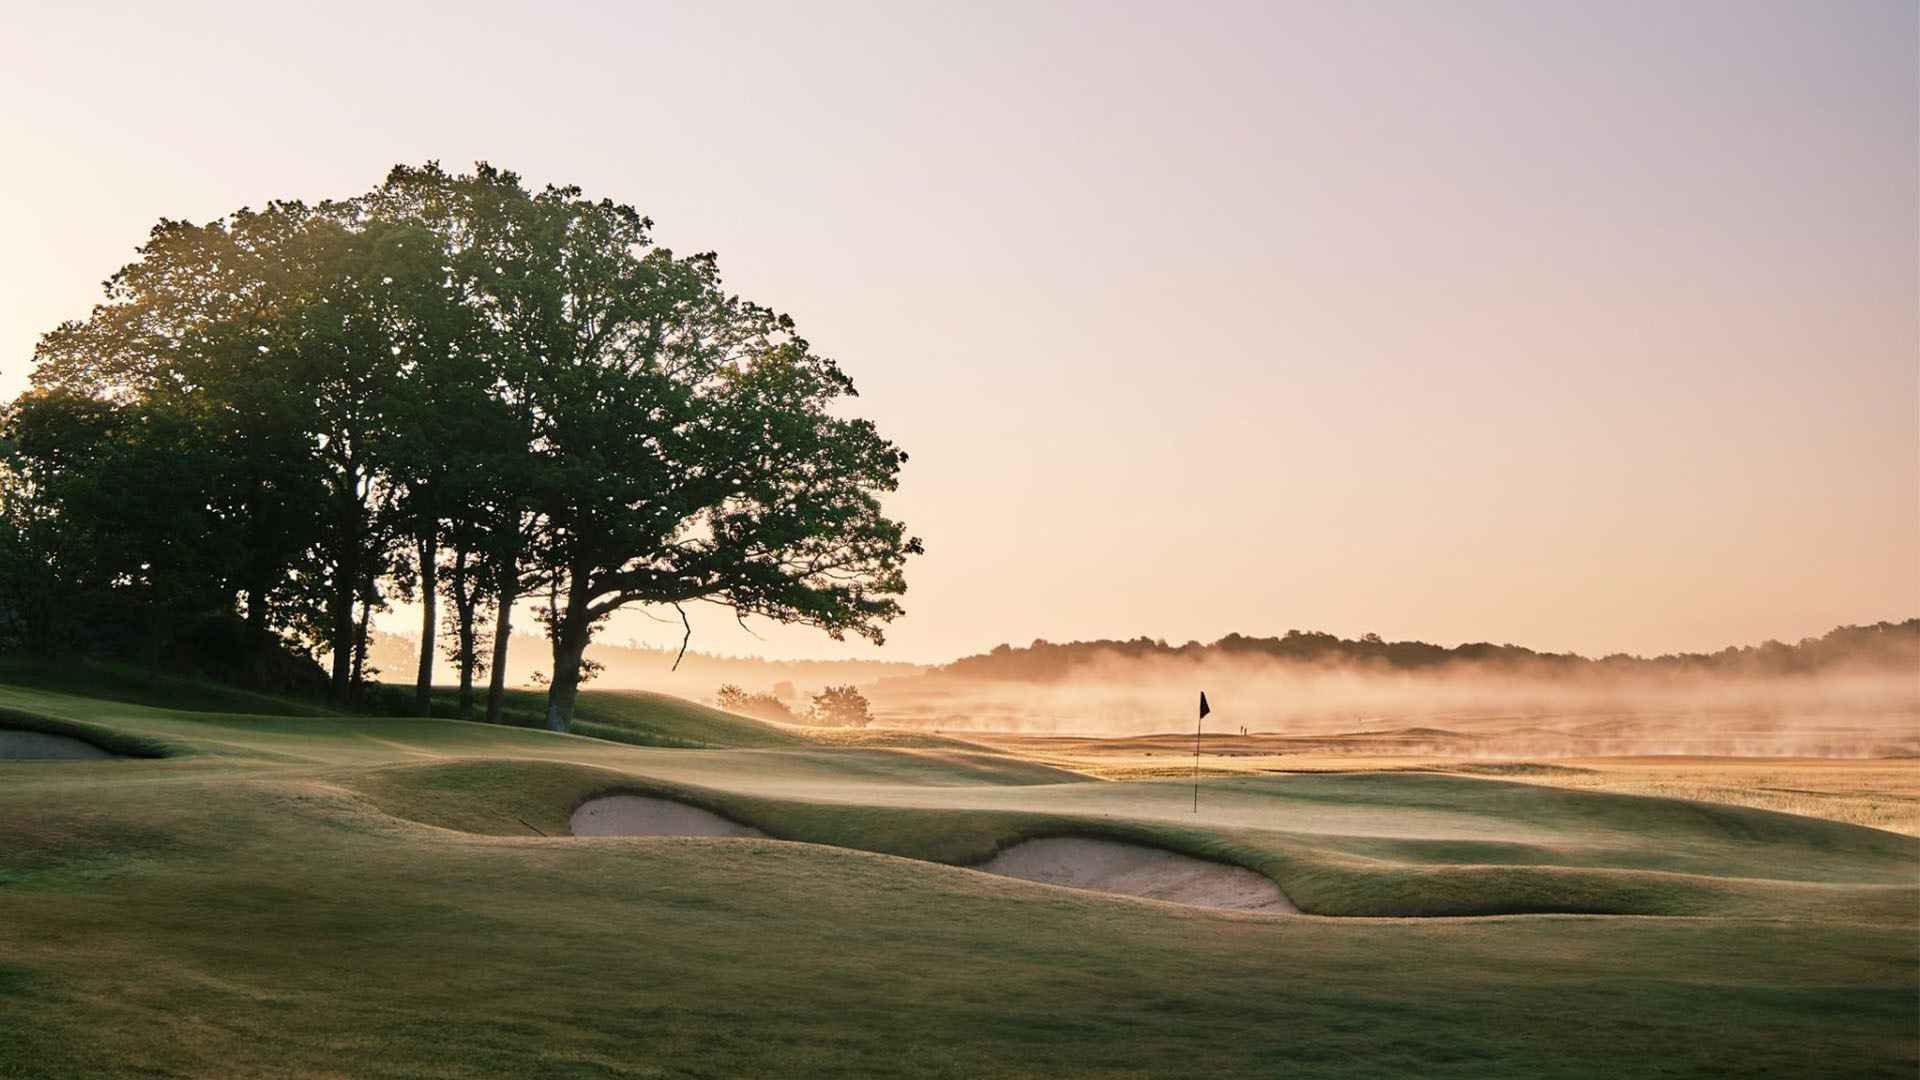 Golf course during a misty morning with a fairway, bunker, putting green, and also some trees.